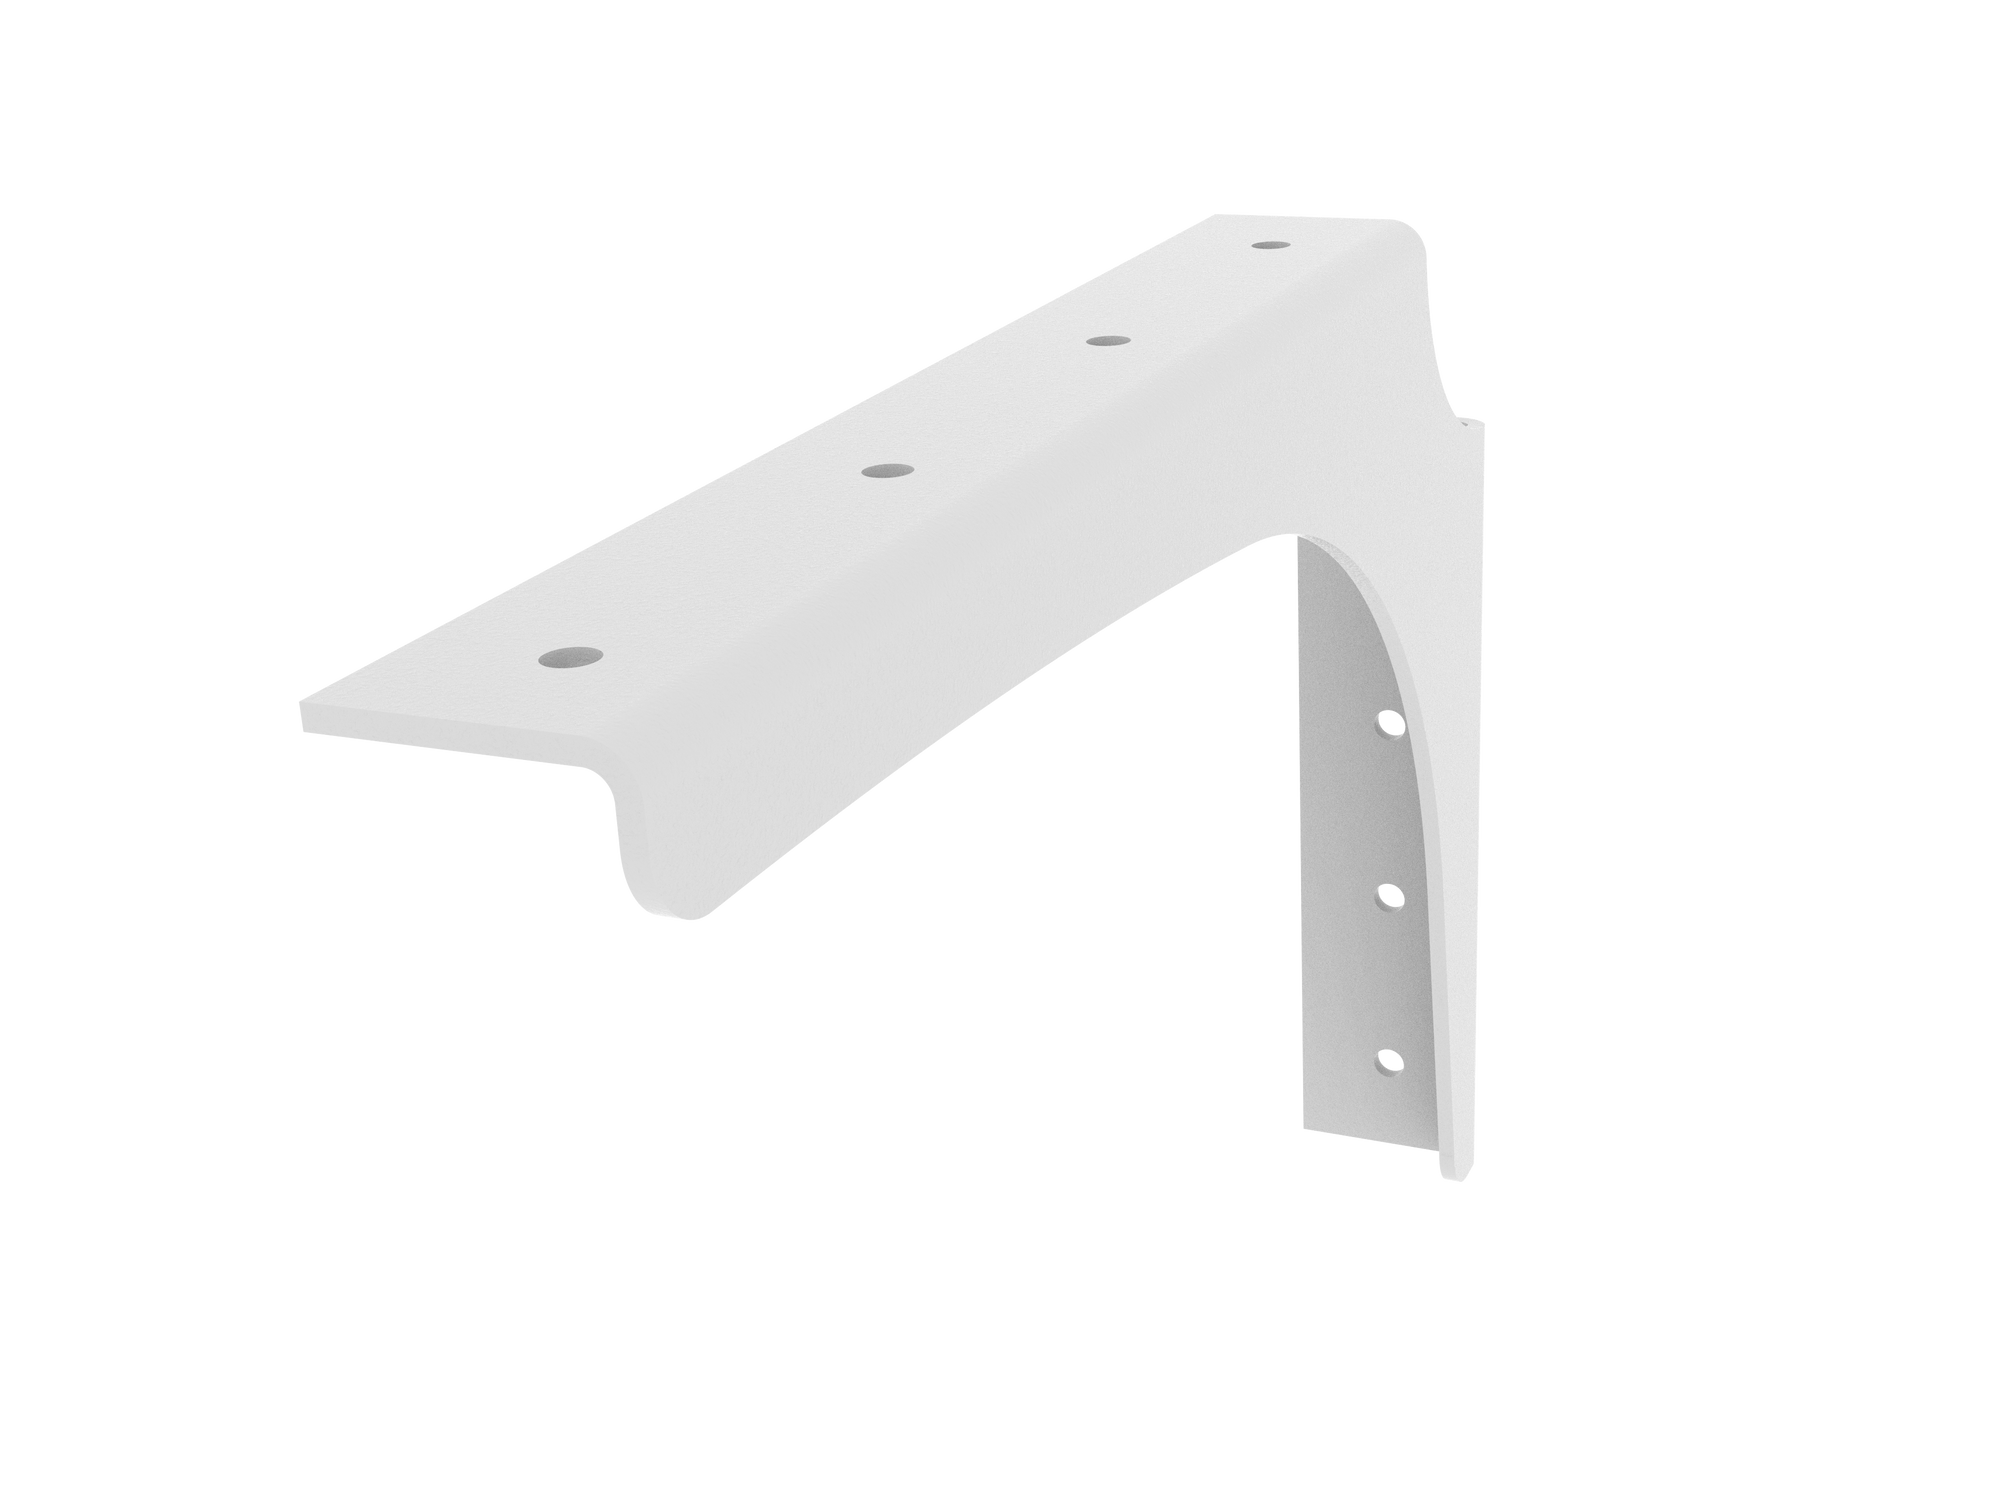 Universal Commercial Support Bracket - 12" x 8" Left with White Powder Coat Finish. Supports floating ADA-compliant vanities, desks, shelving, countertops, and more.